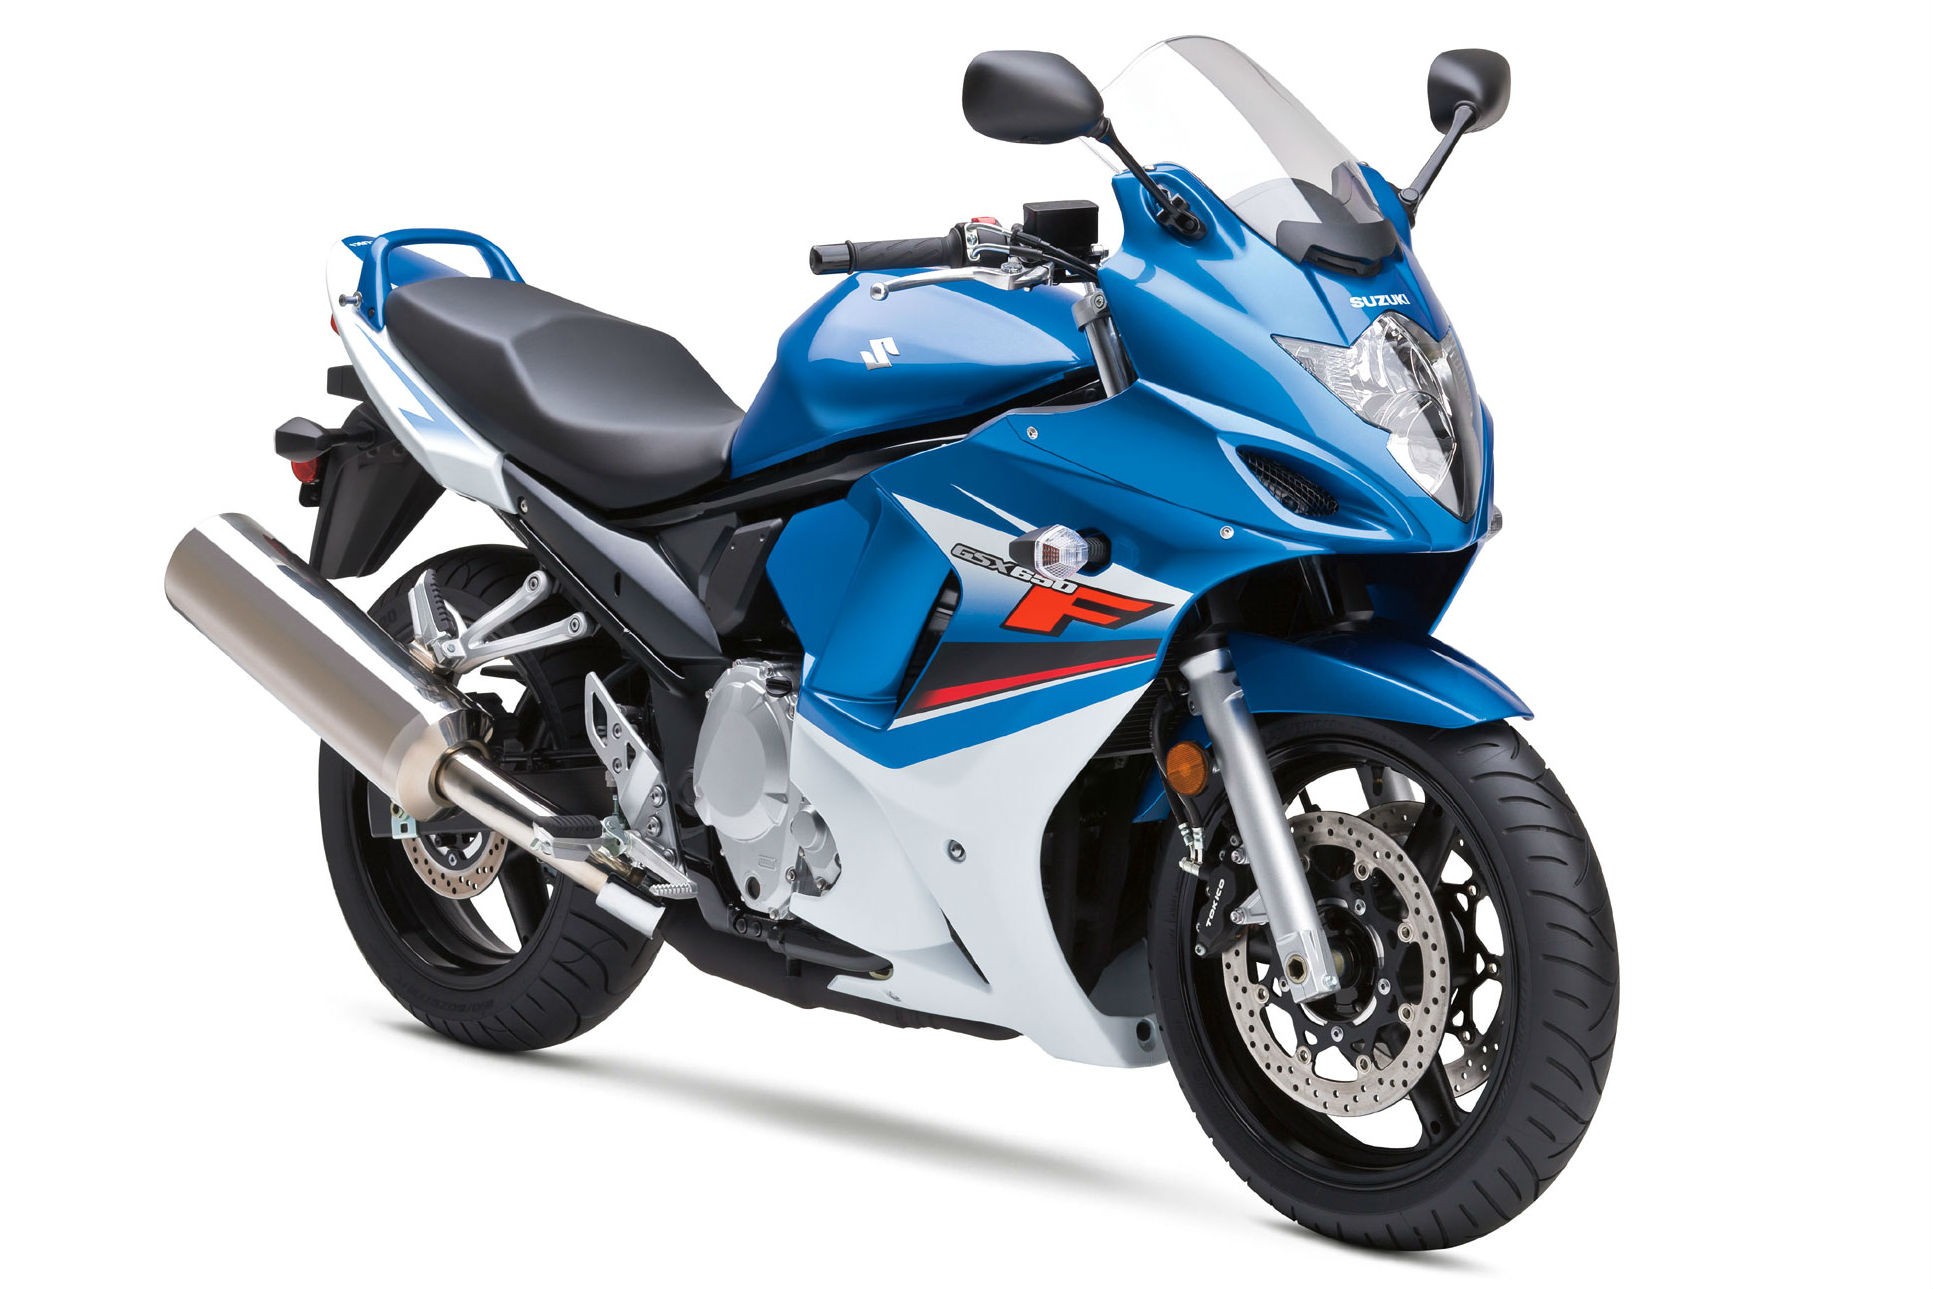 Top 10 recent 600s for £3k